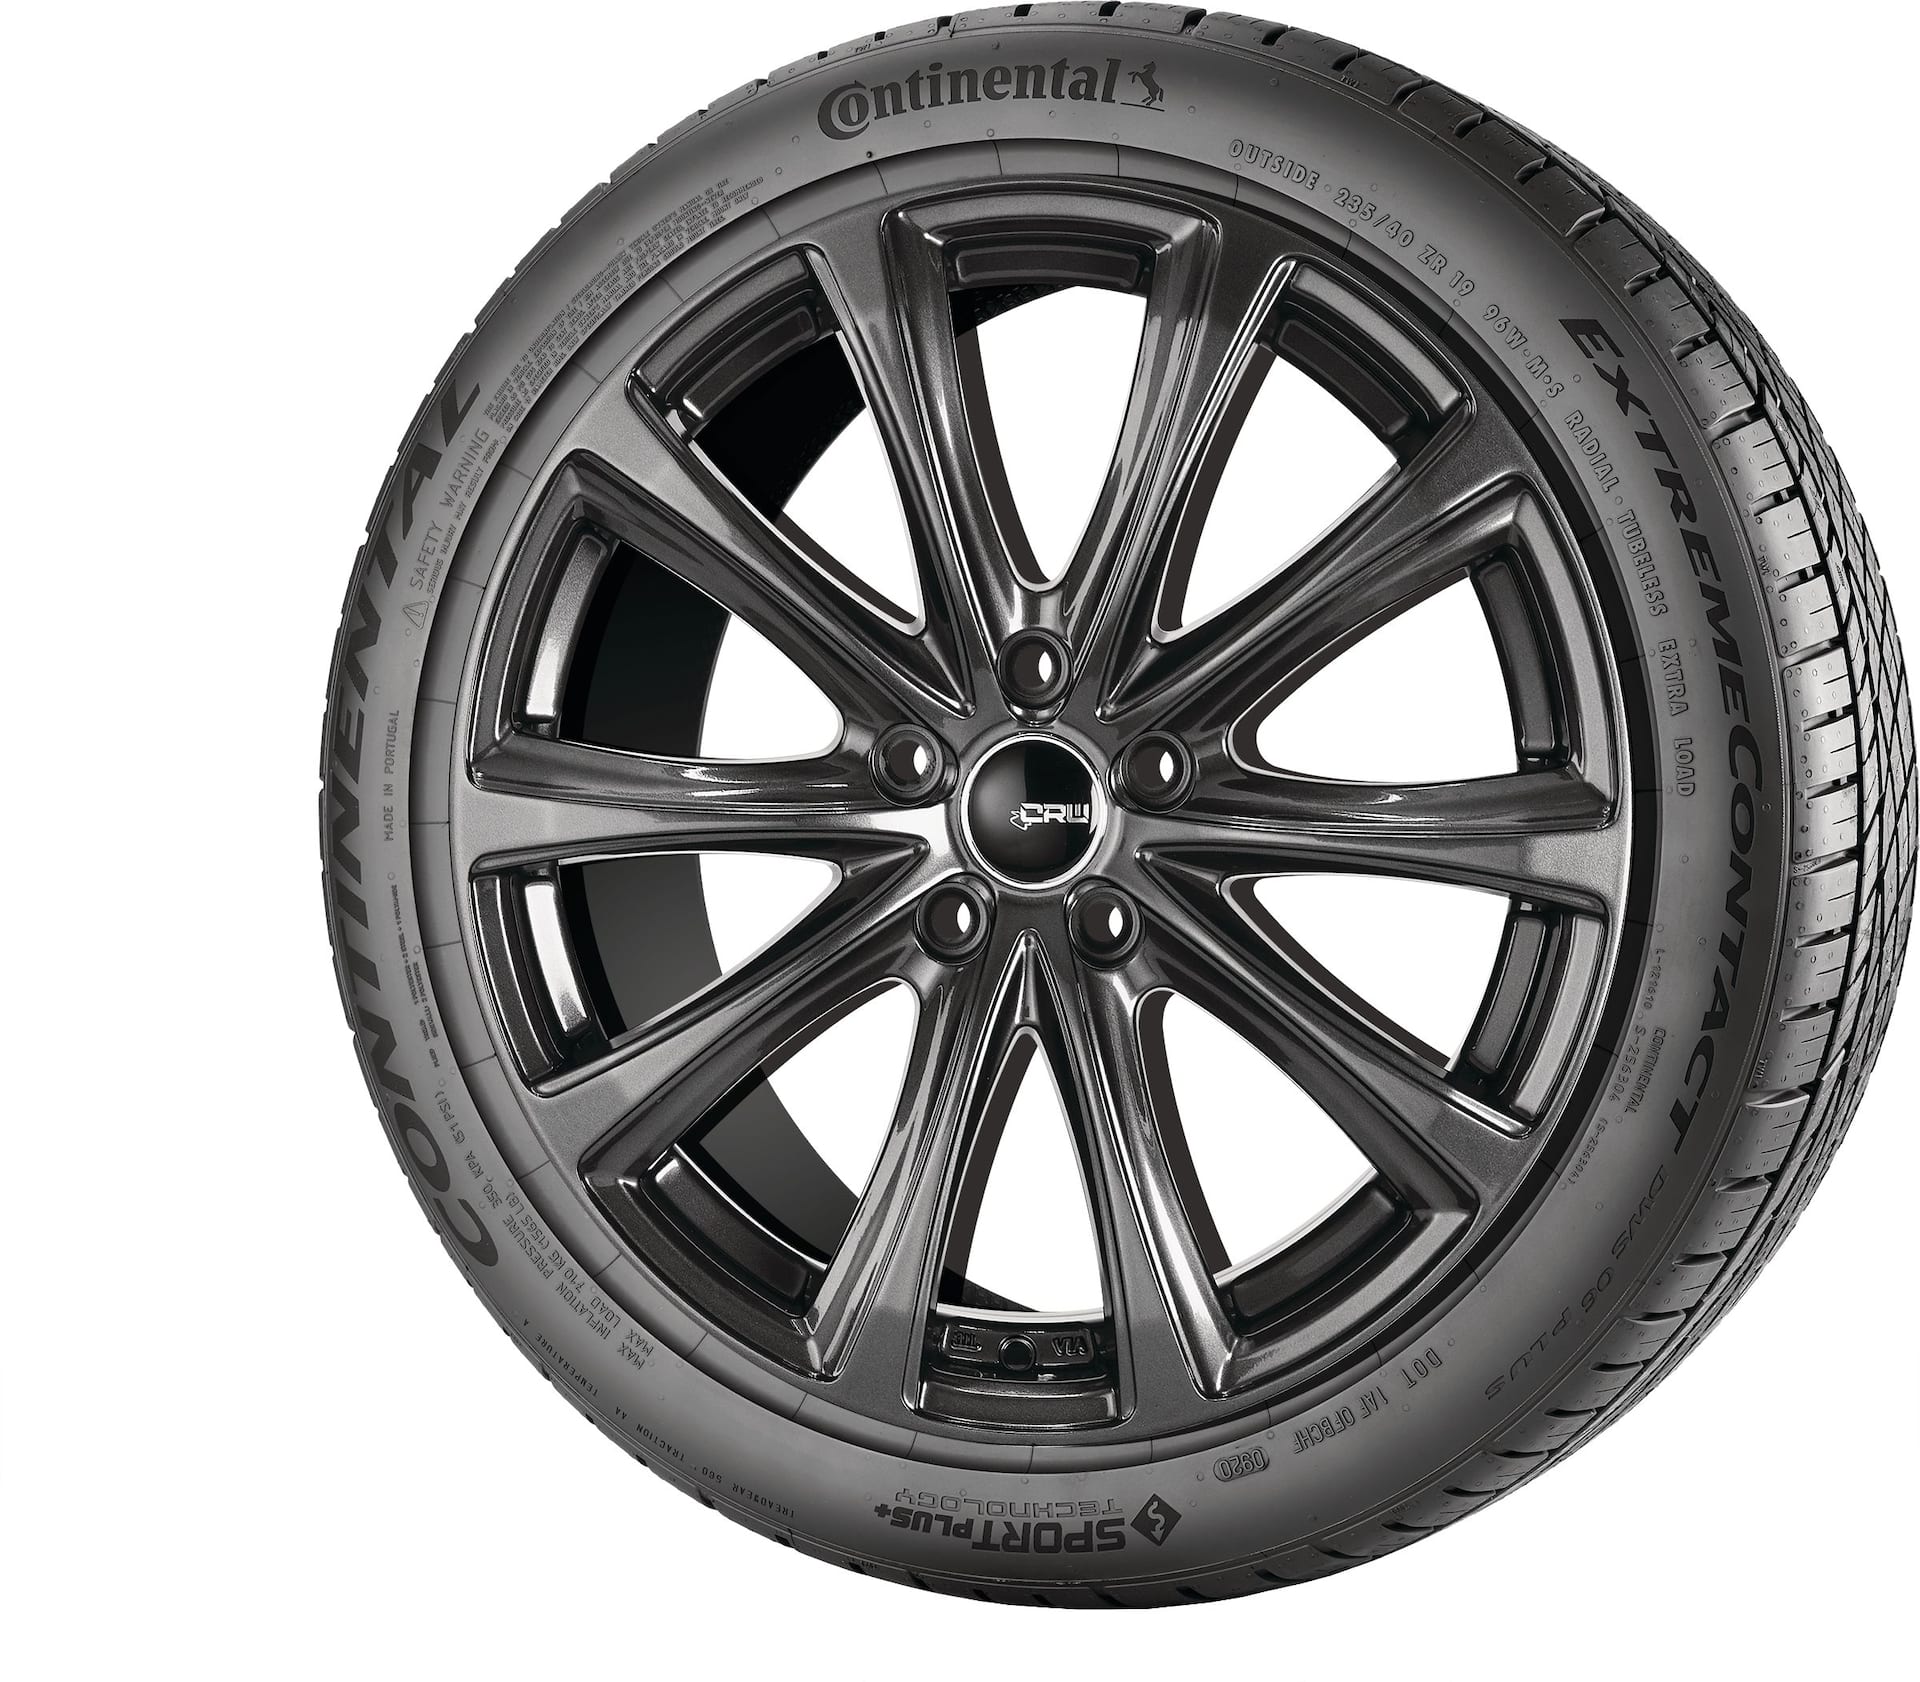 Continental ExtremeContact DWS06+ Performance Tire For Passenger